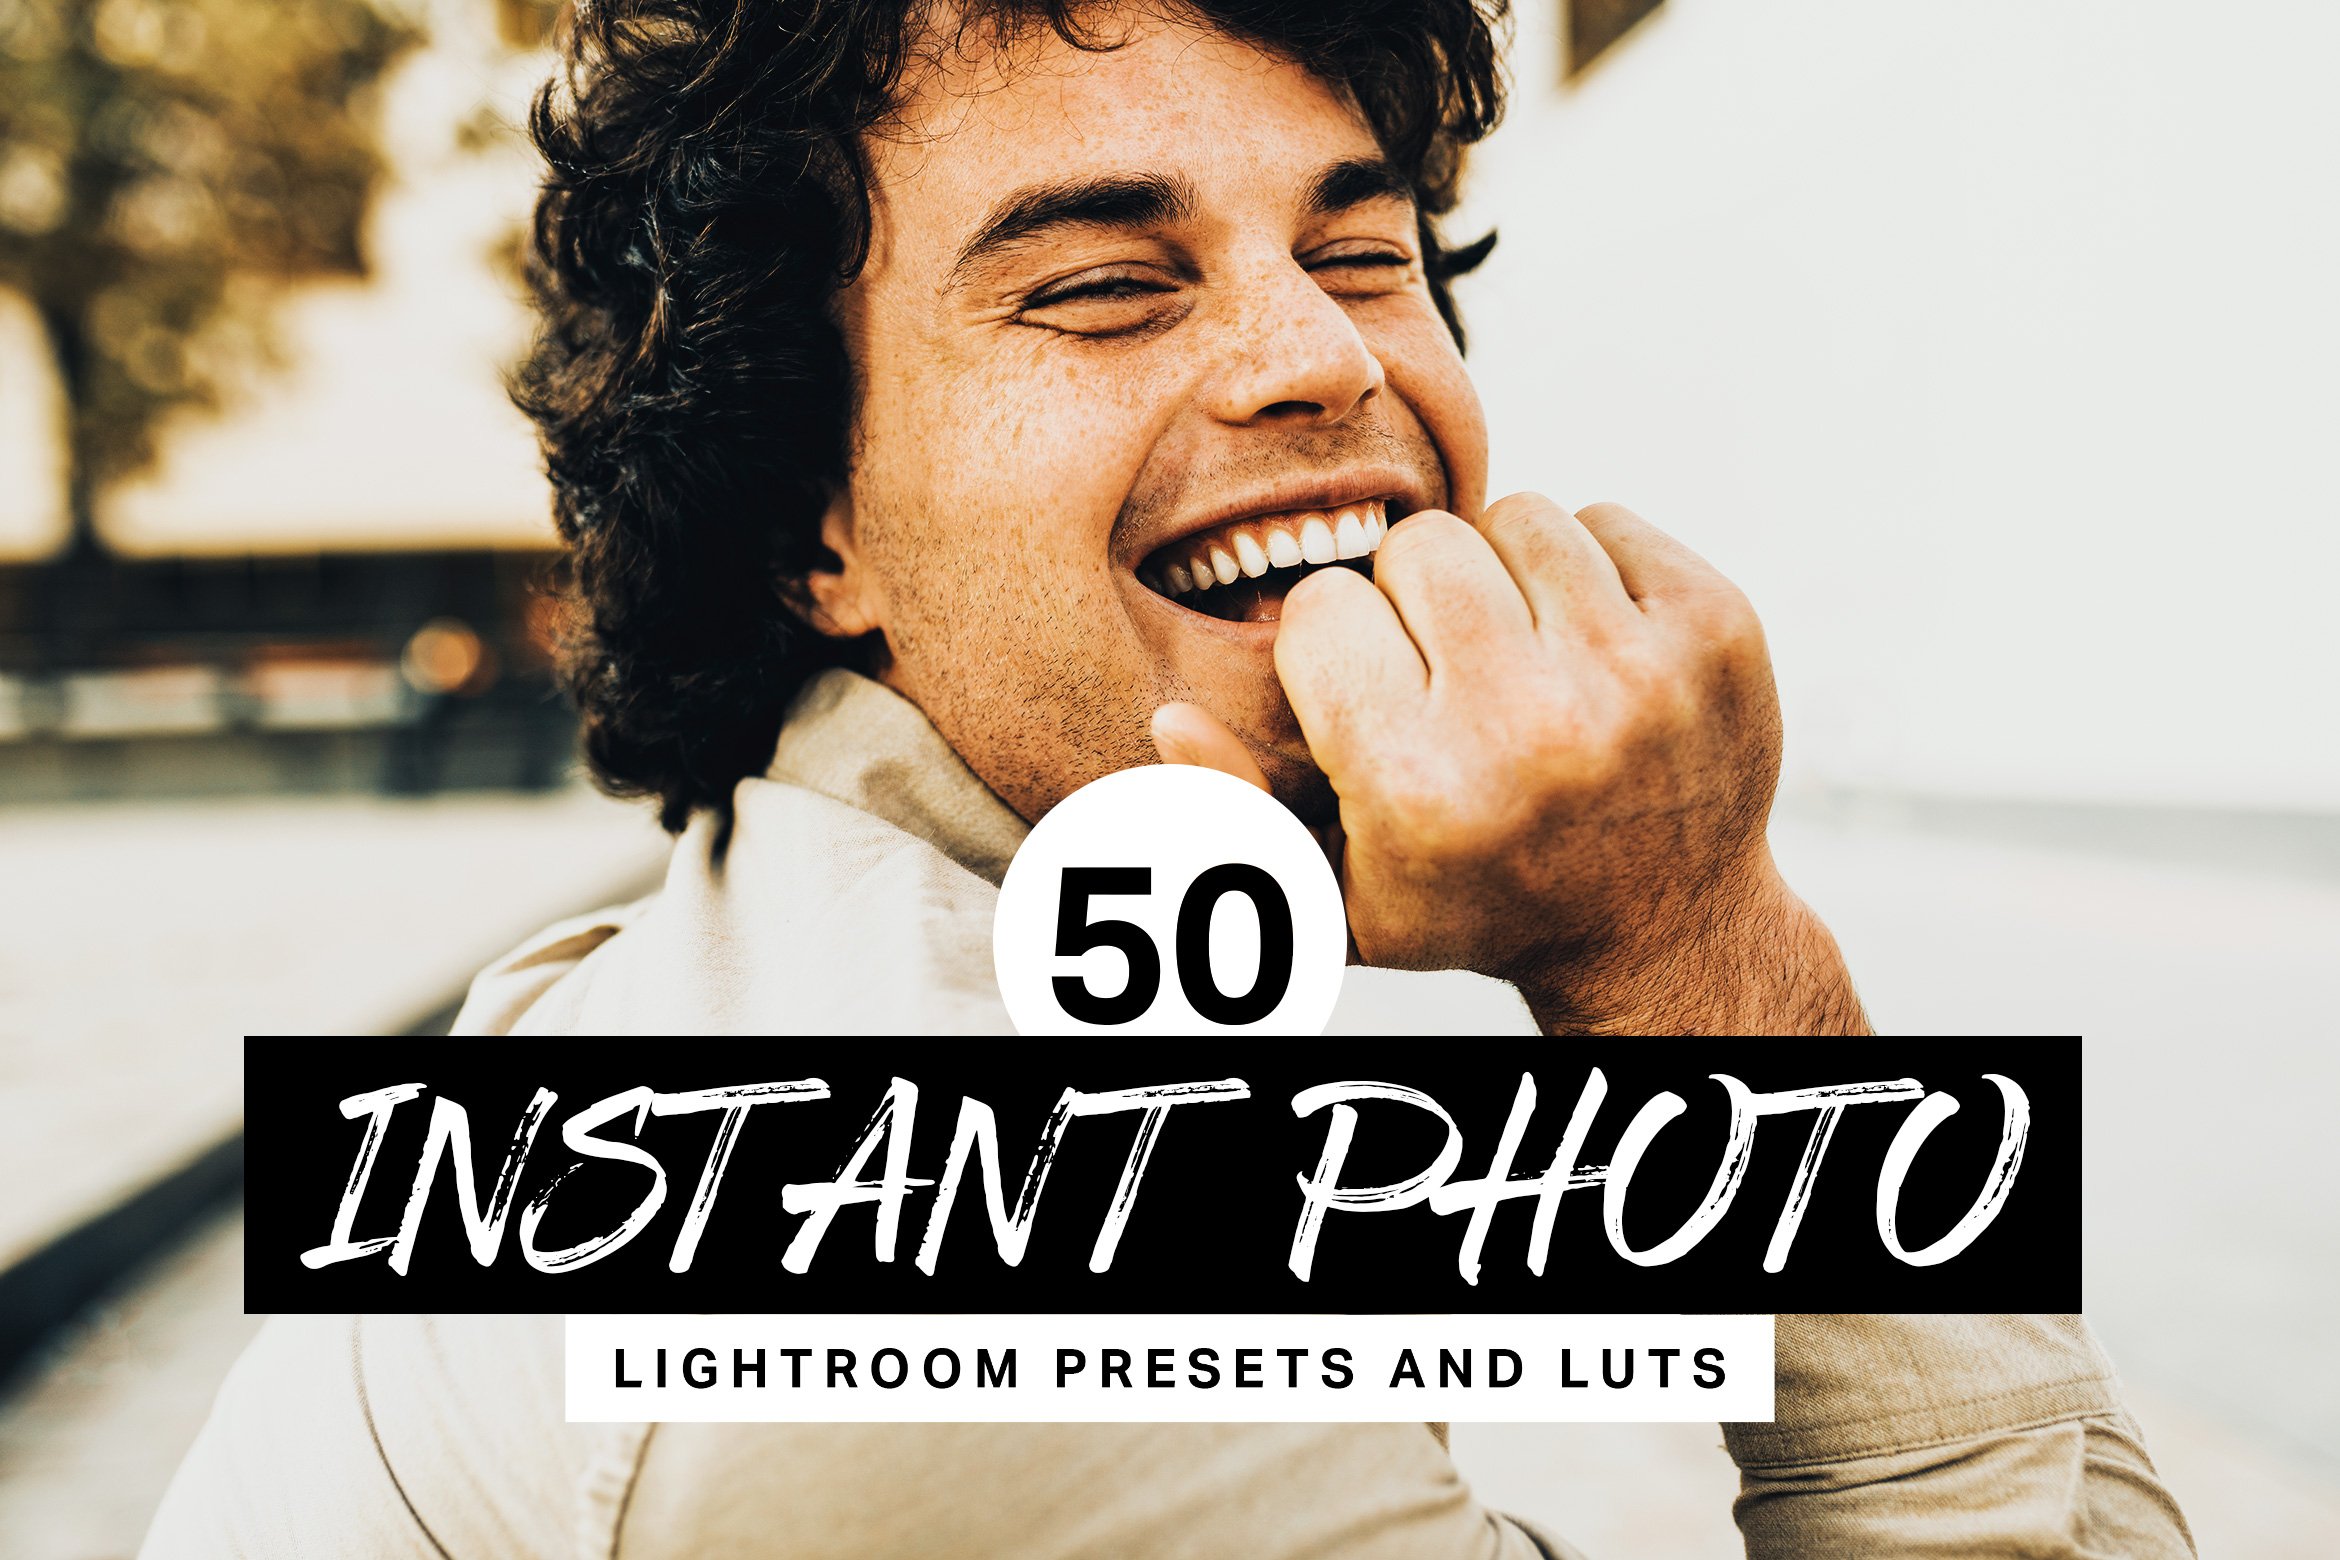 50 Instant Photo Lightroom Presetscover image.